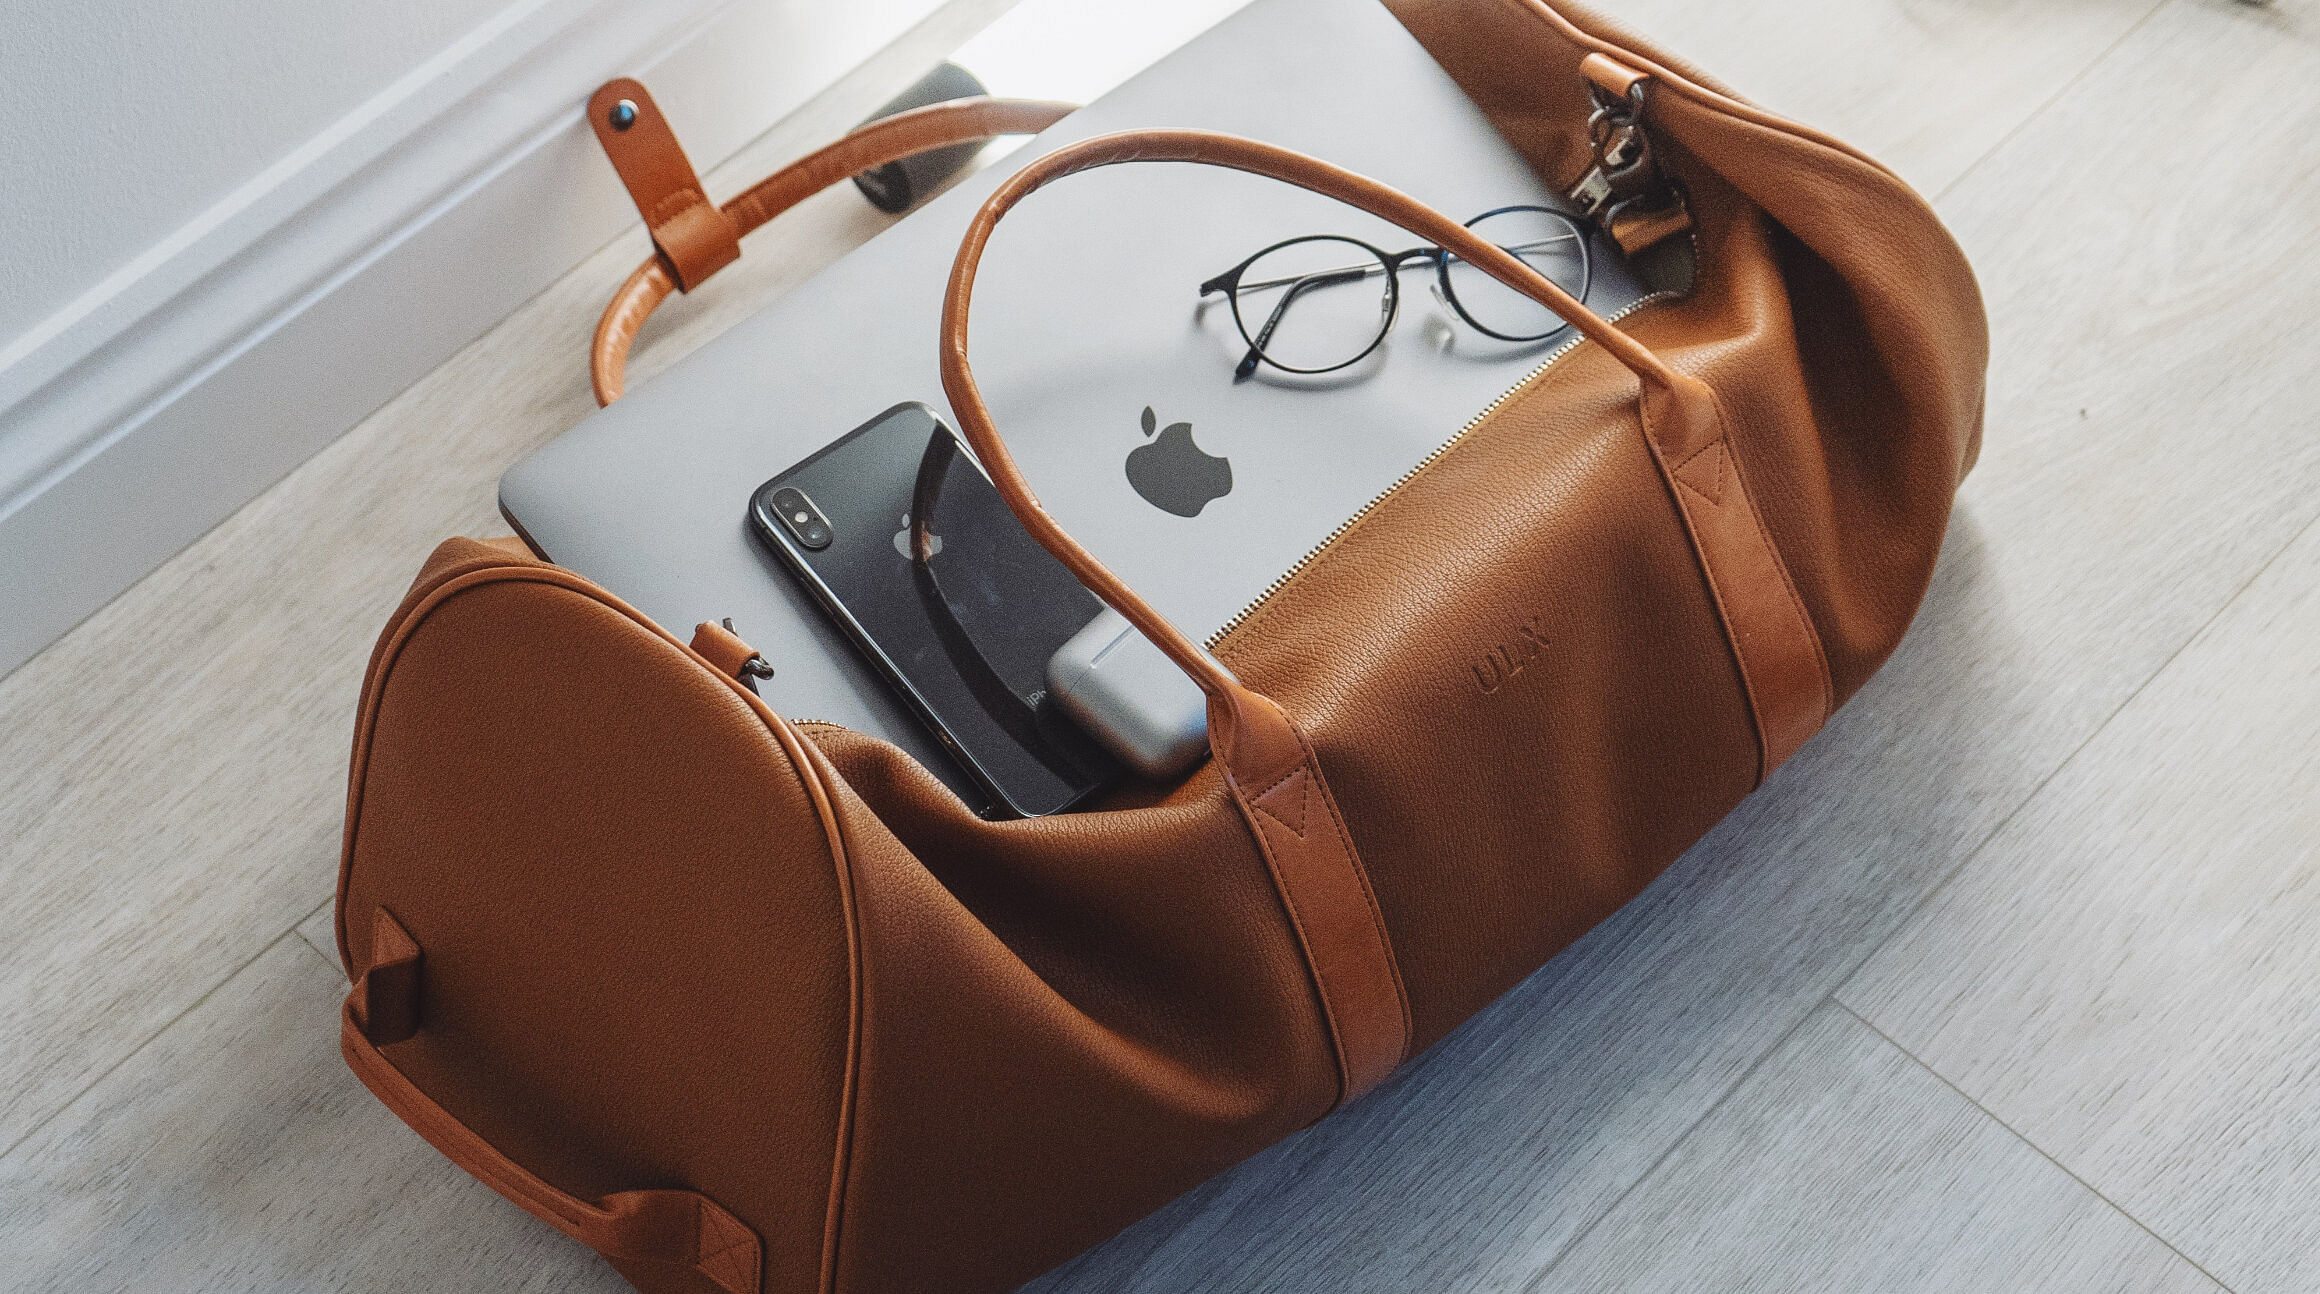 duffel bag with a smartphone and a laptop sitting inside it